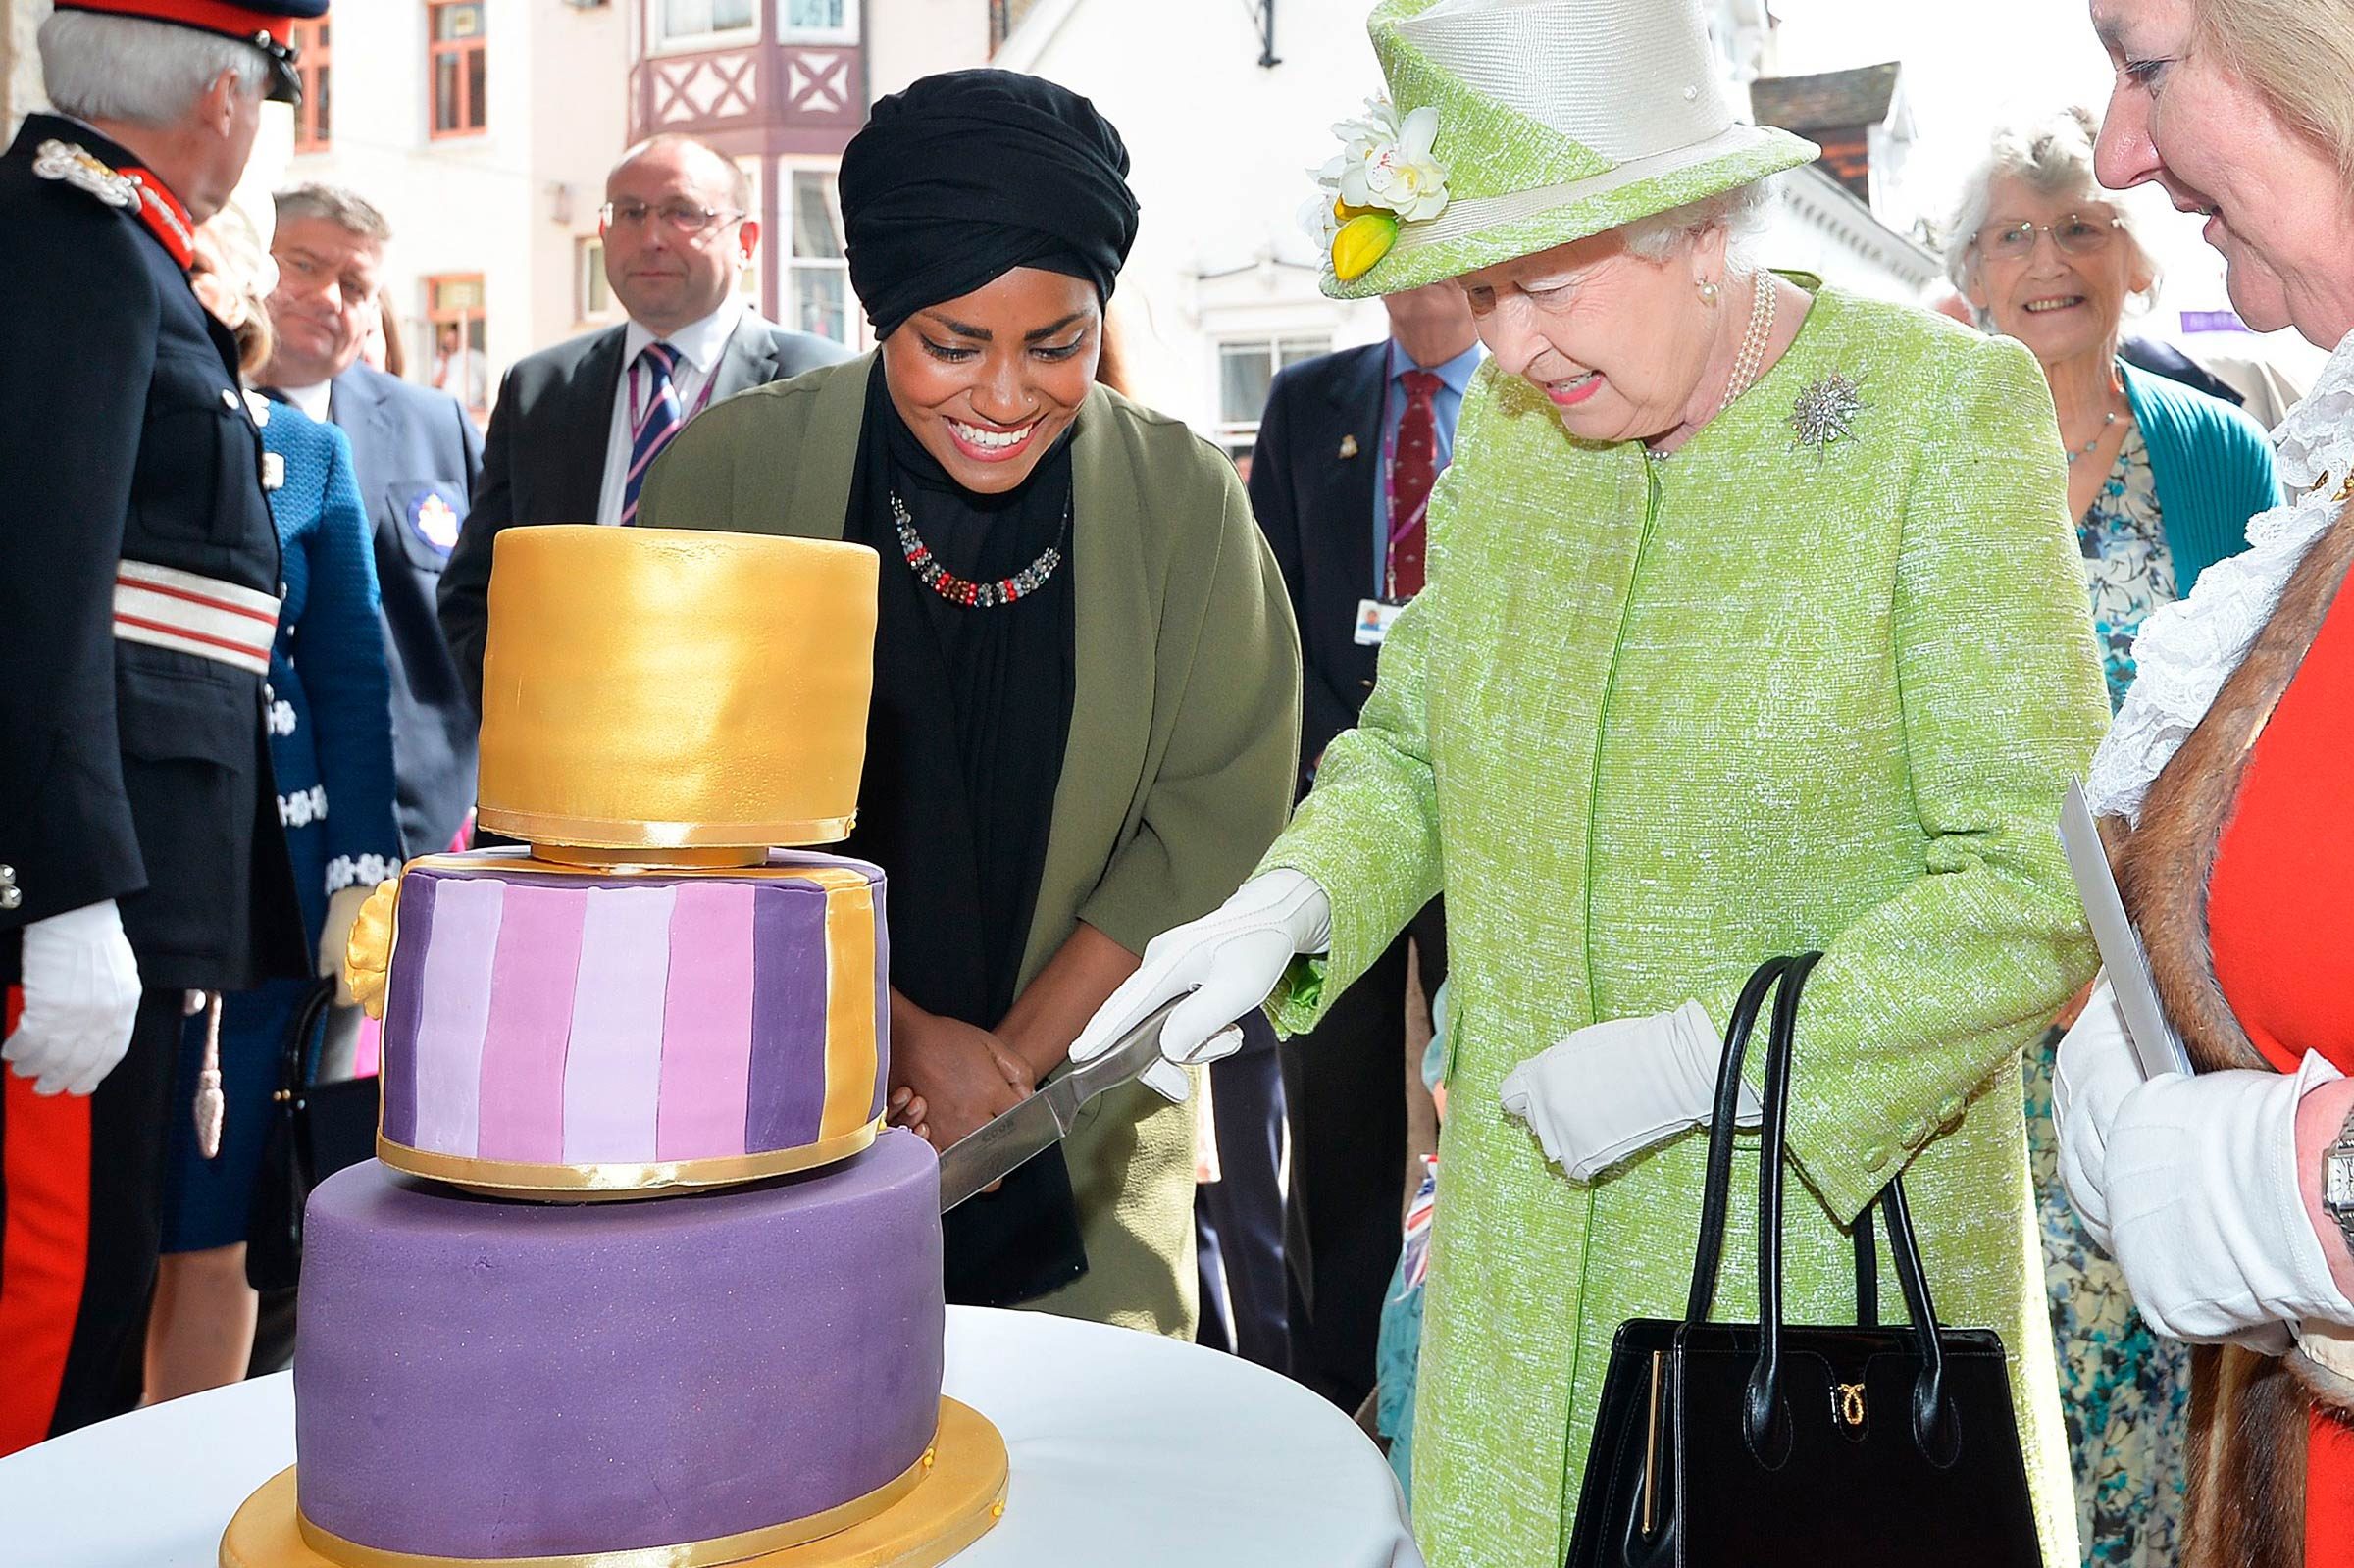 Why Does Queen Elizabeth Have Two Birthdays Each Year?